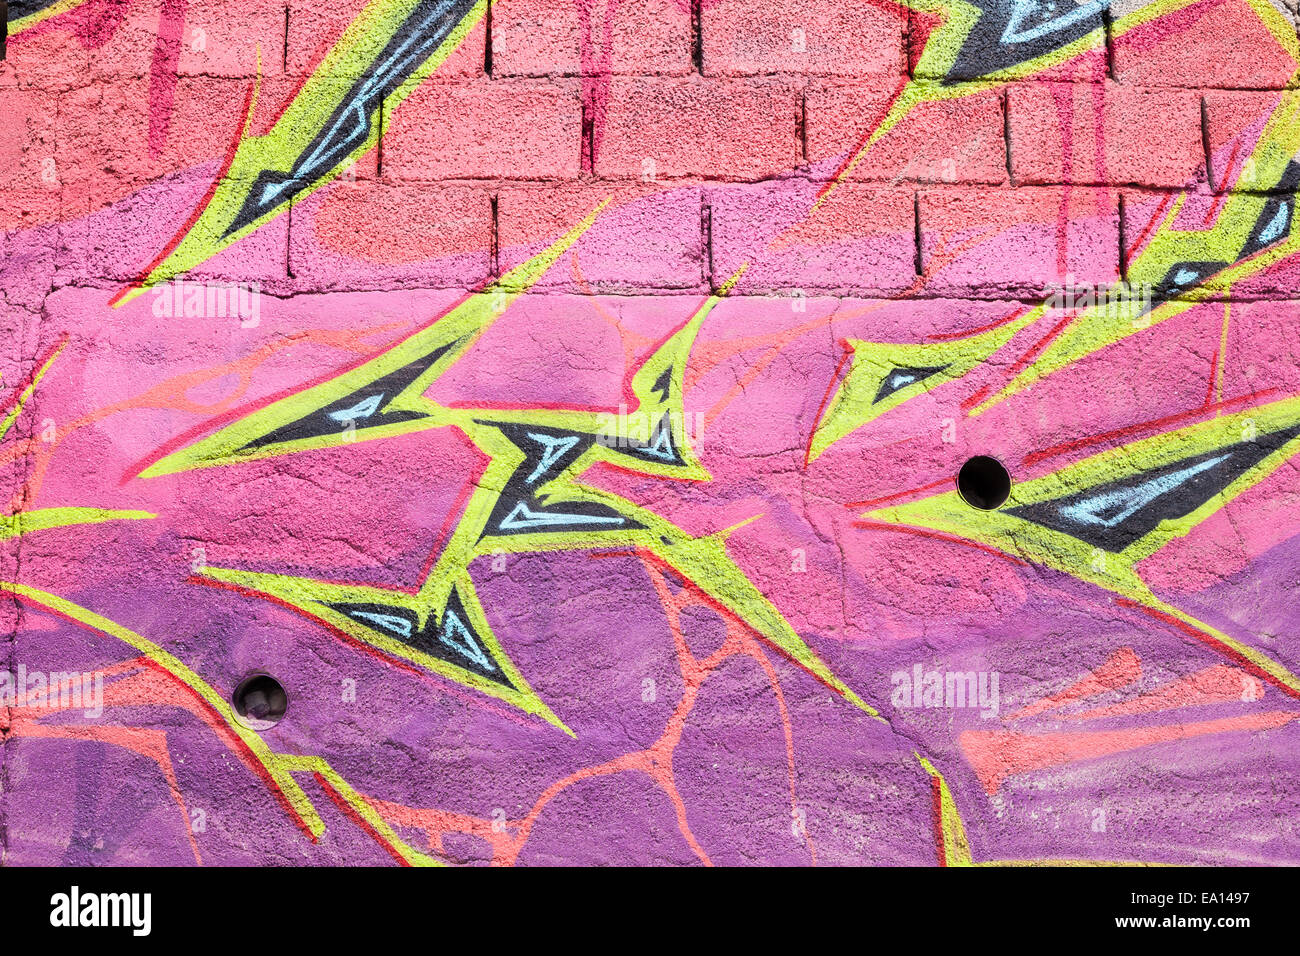 Colorful graffiti on the wall Stock Photo